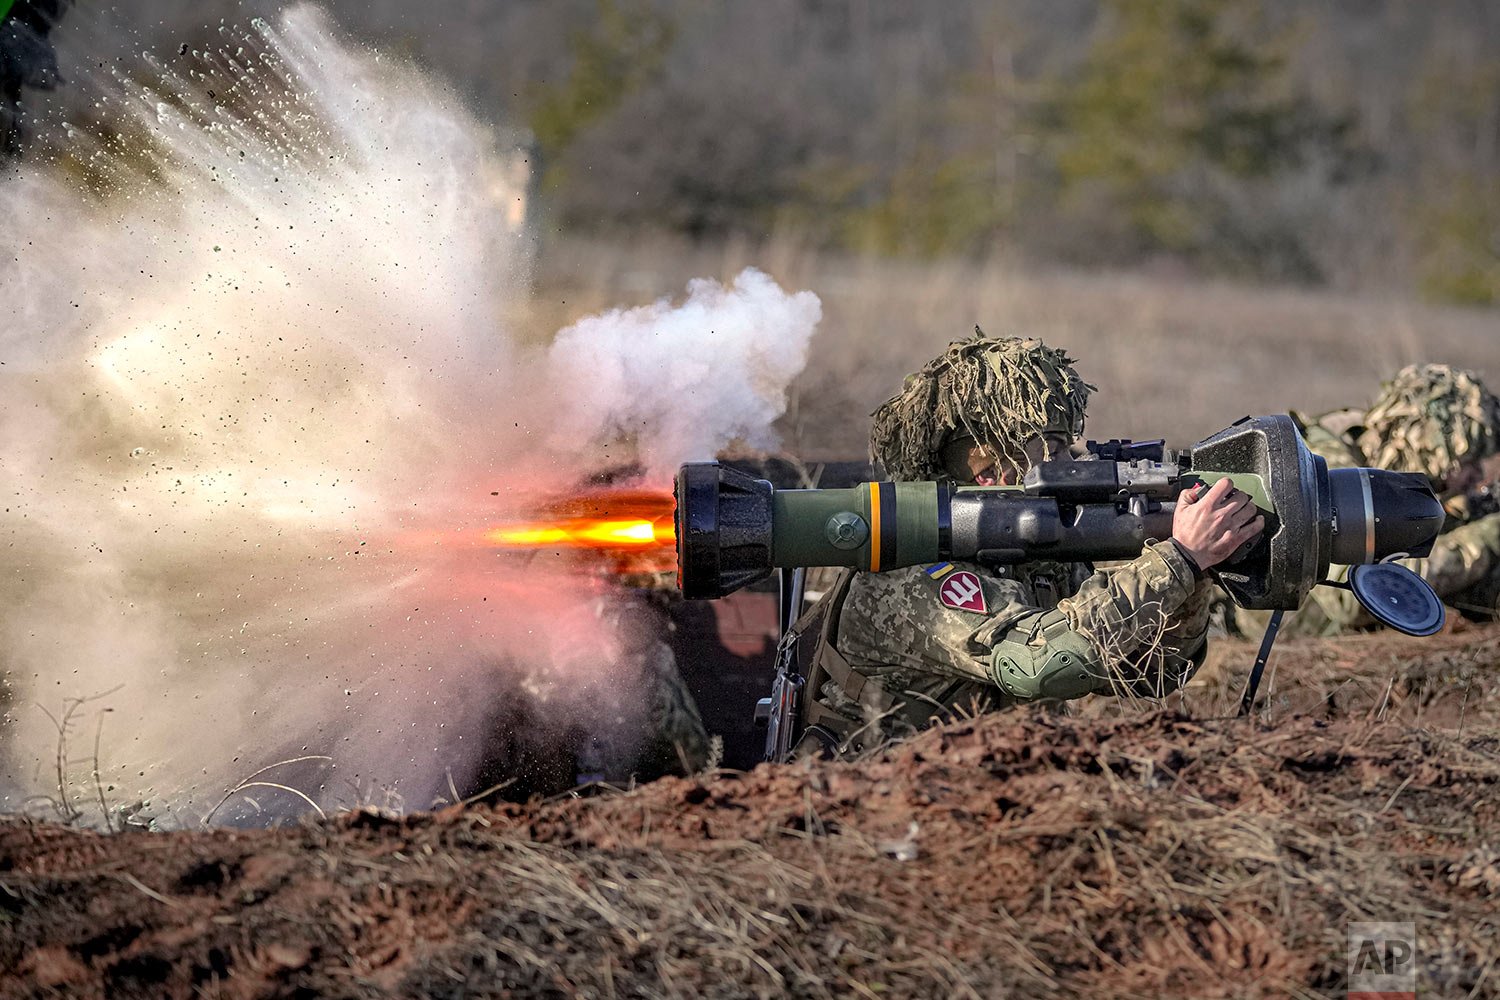  A Ukrainian serviceman fires an NLAW anti-tank weapon during an exercise in the Joint Forces Operation, in the Donetsk region, eastern Ukraine, Tuesday, Feb. 15, 2022. (AP Photo/Vadim Ghirda) 